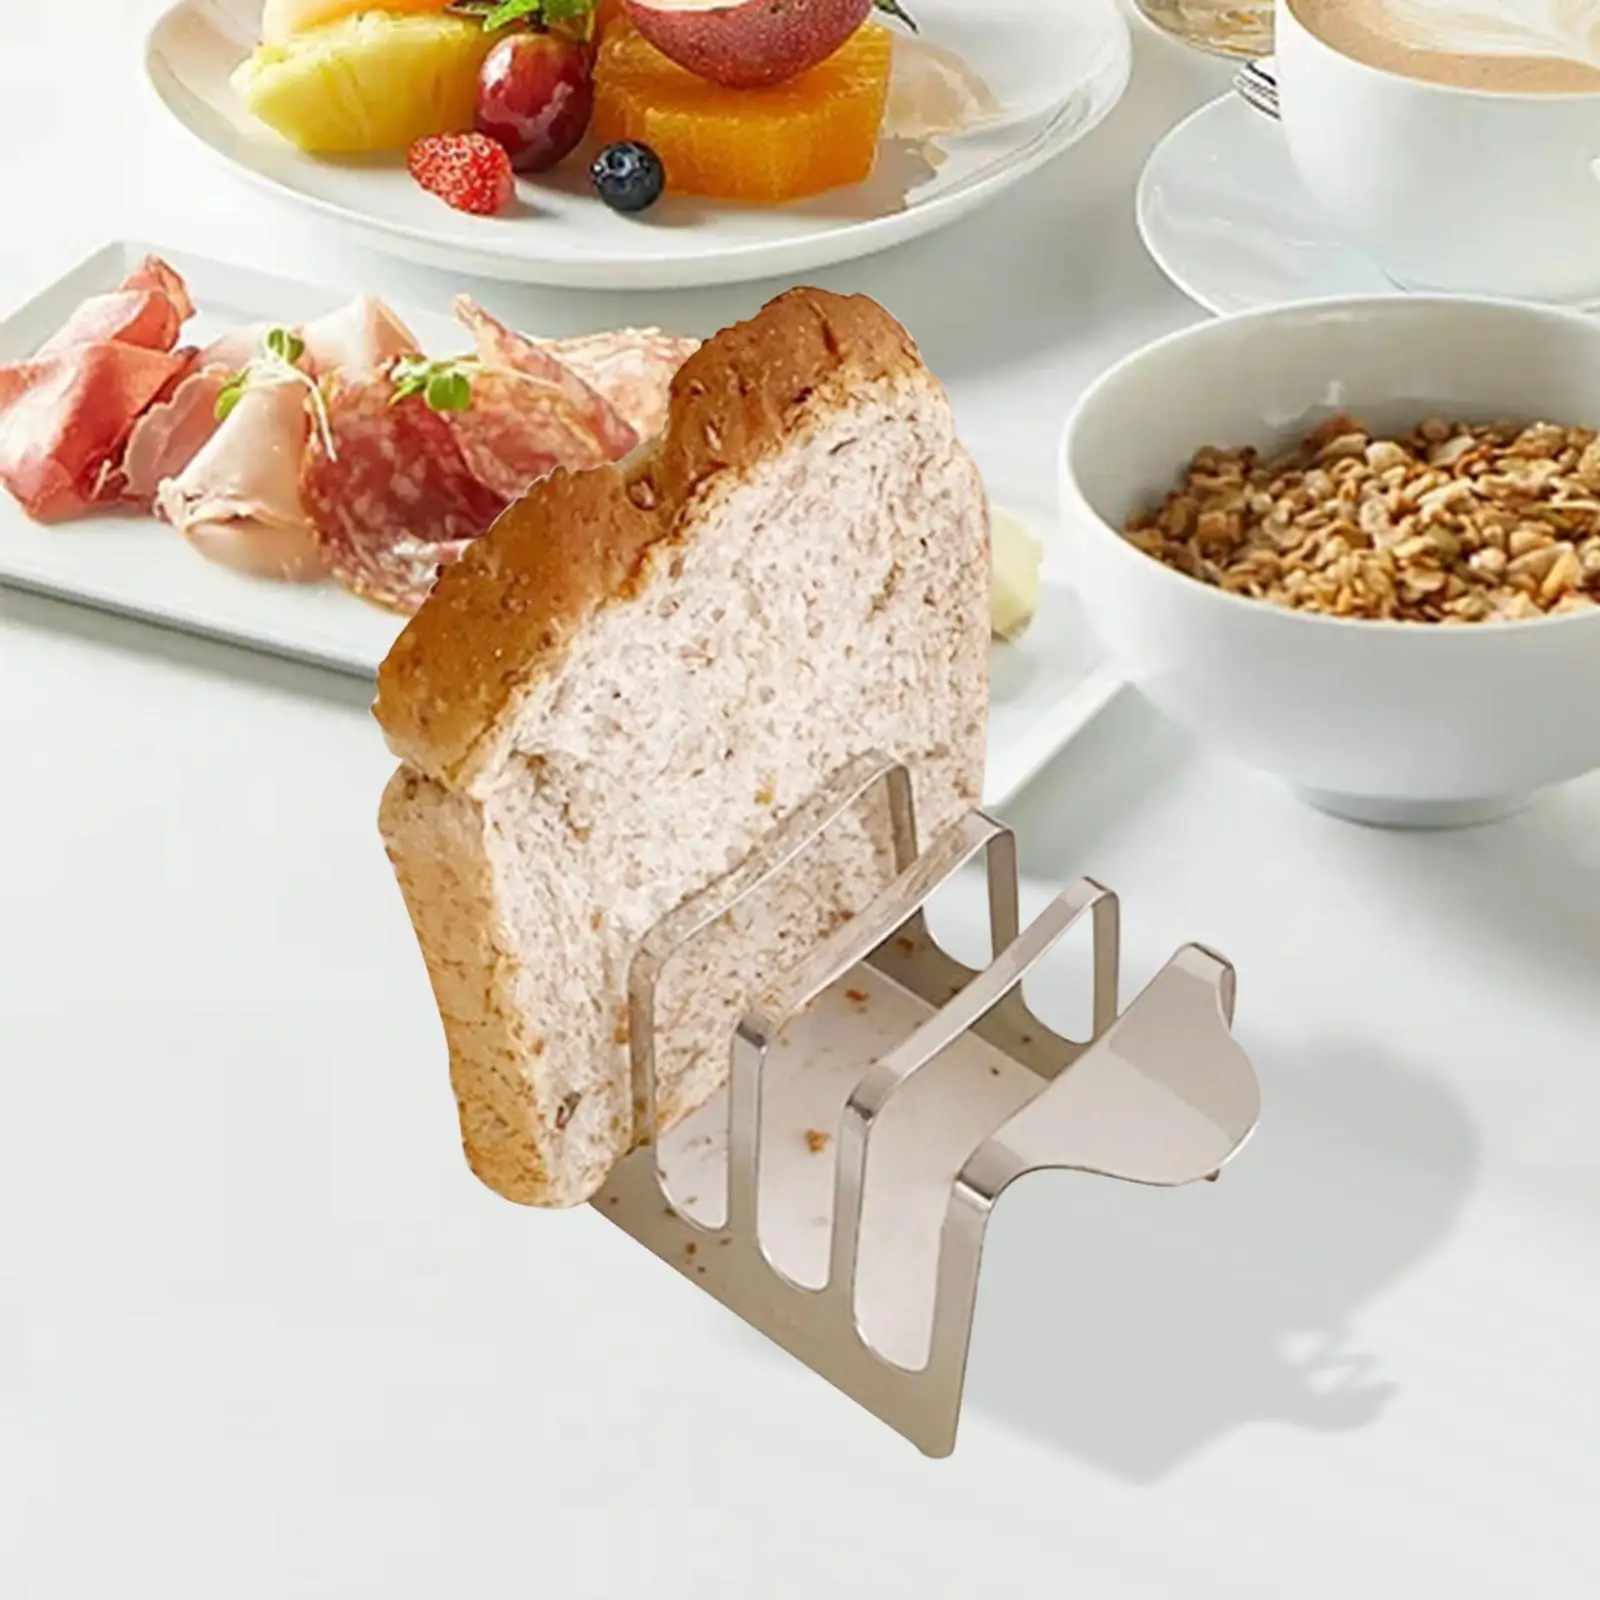 Toast Rack Bread Holder Stainless Steel Bread Rack 4 Slice Slots Bread Display Stand for Cooking Bakery Oven Kitchen Pancake